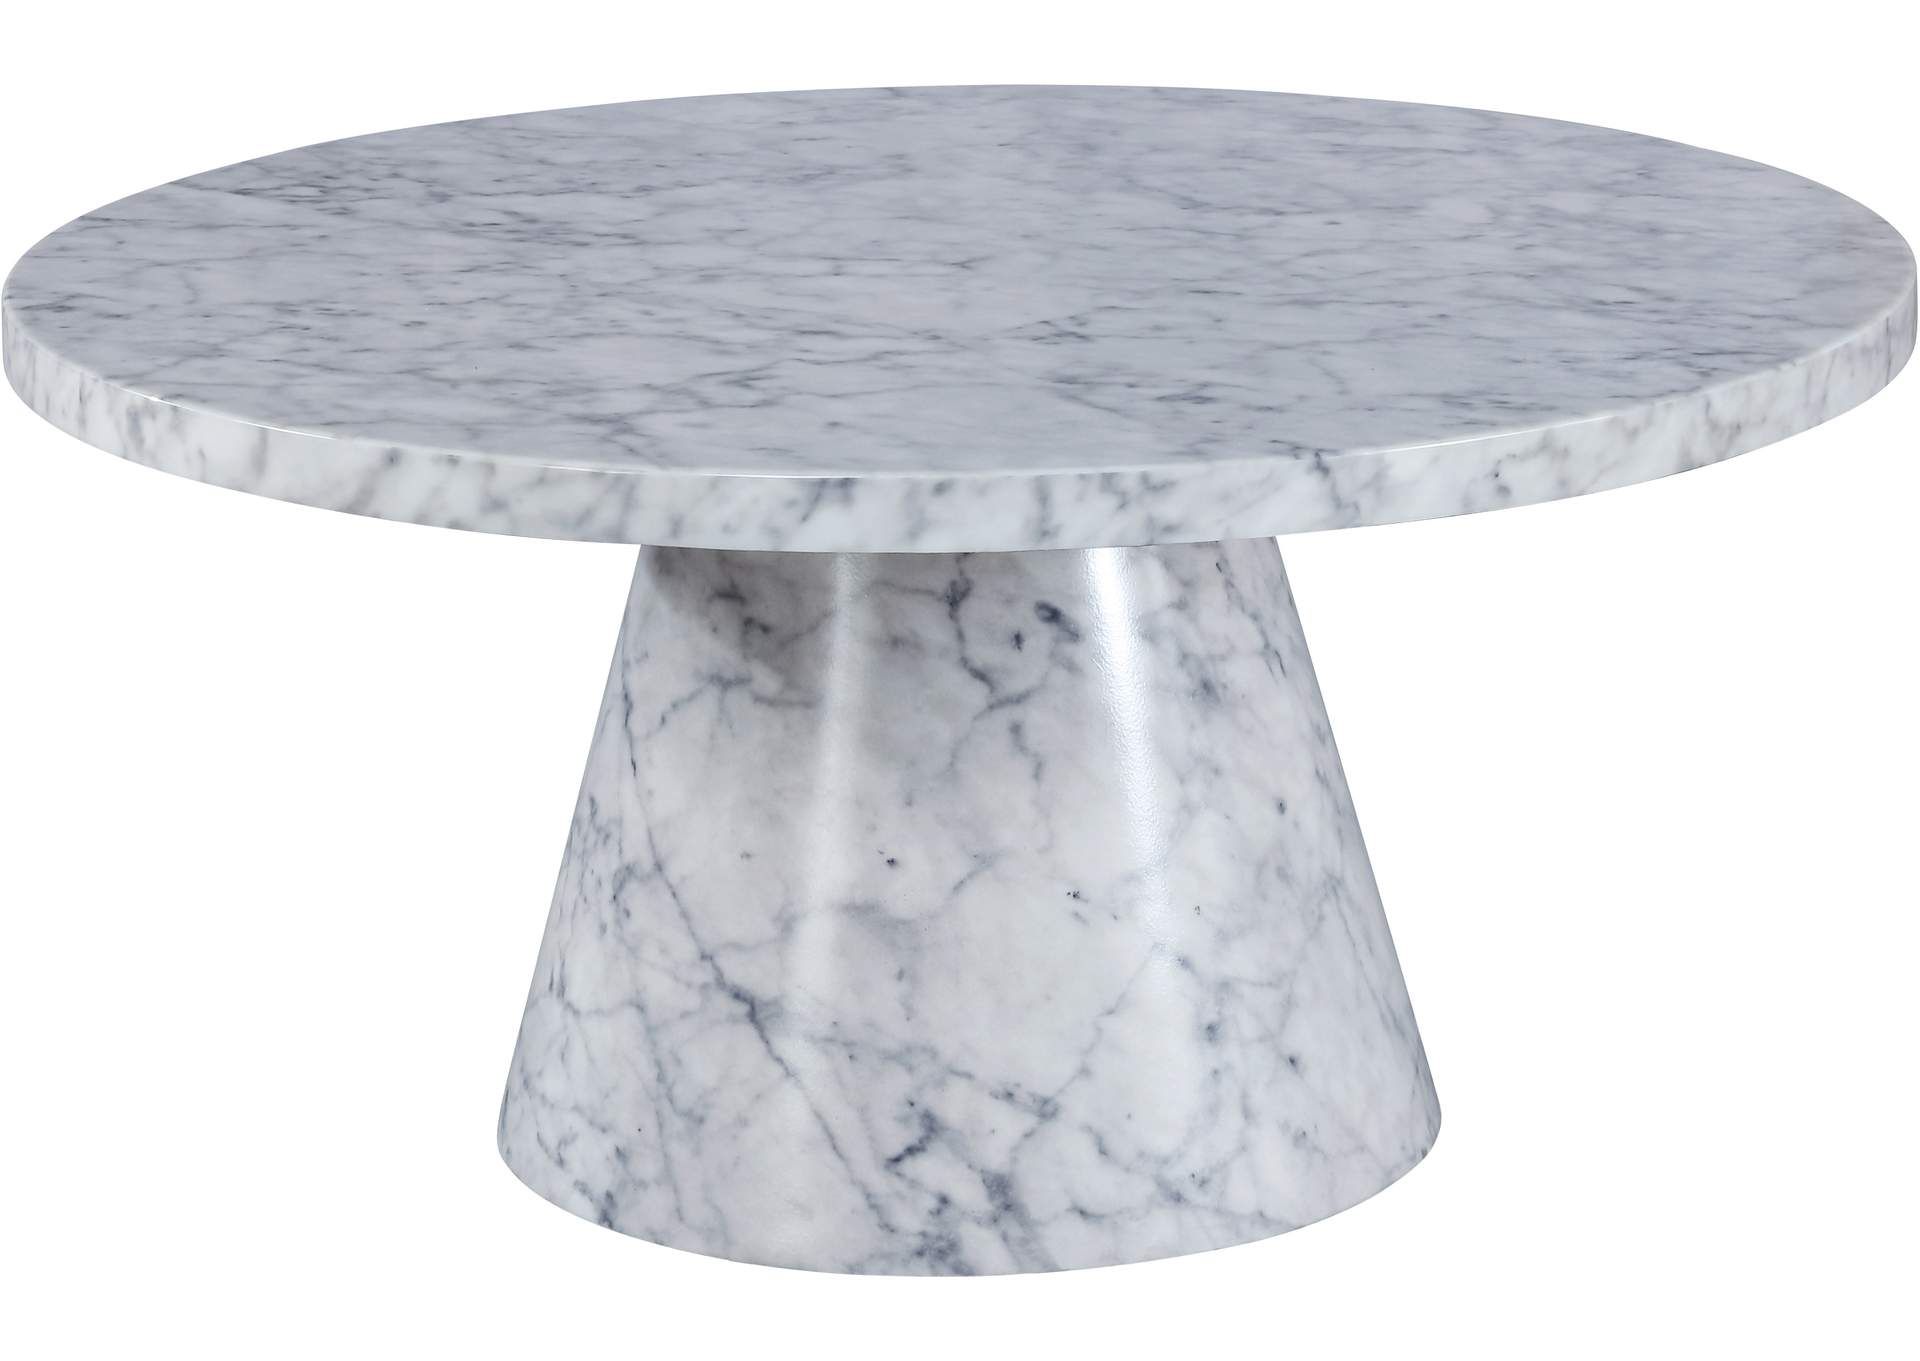 Omni White Faux Marble Coffee Table Best Buy Furniture And Mattress Inside Newest White Faux Marble Coffee Tables (View 6 of 20)